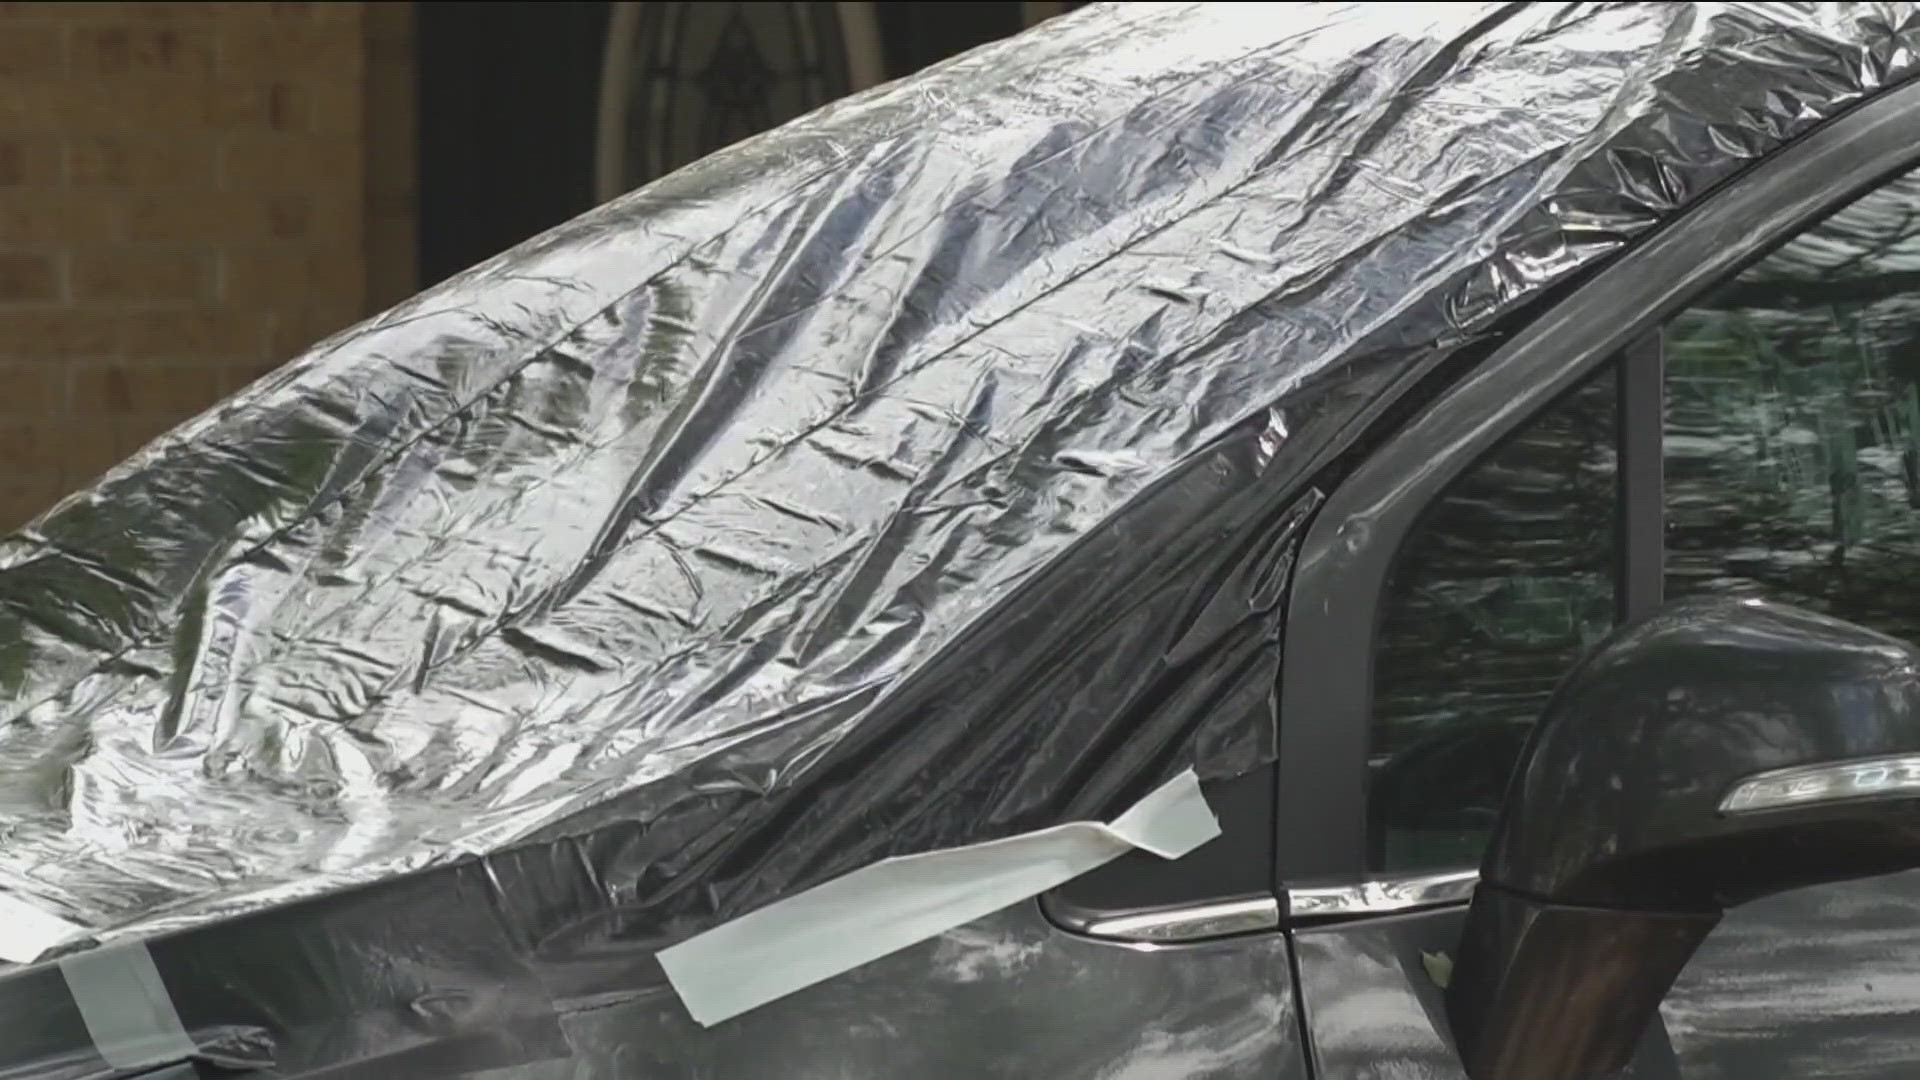 Residents in Salado have been looking to repair broken windshields and windows after widespread storms impacted much of Central Texas earlier this week.